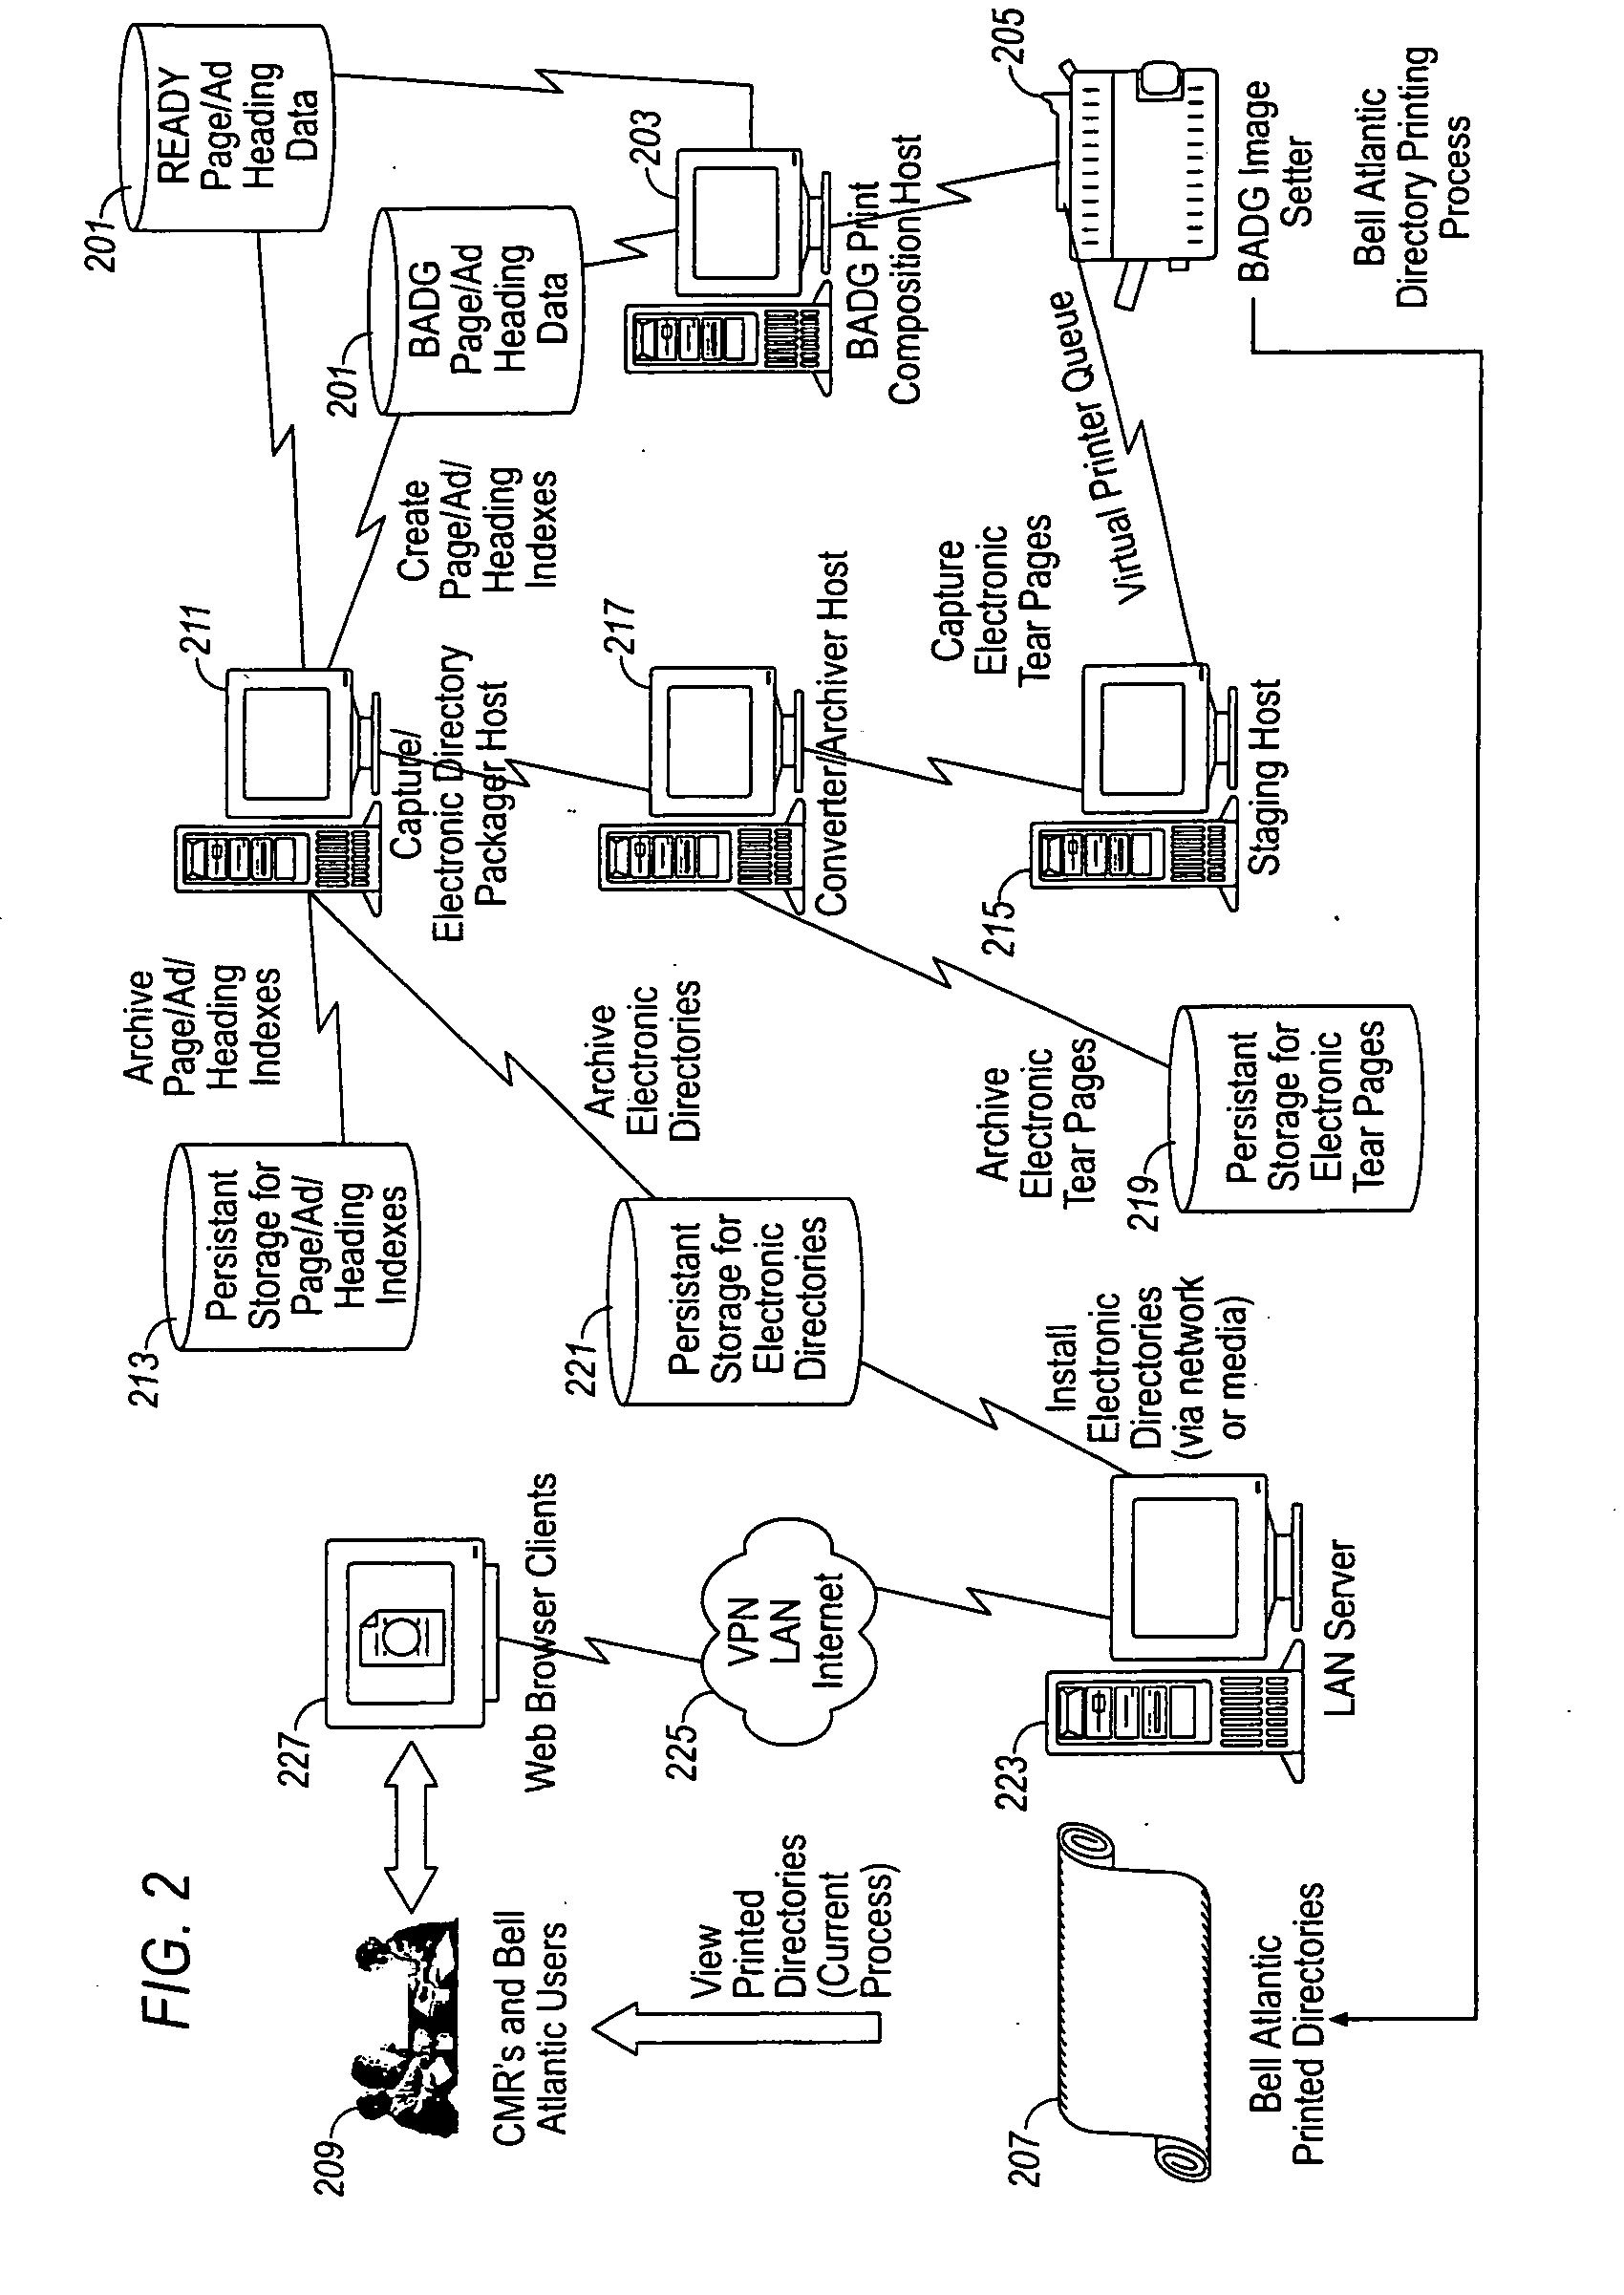 Method and system for electronically viewing multi-page documents while preserving appearance of printed pages